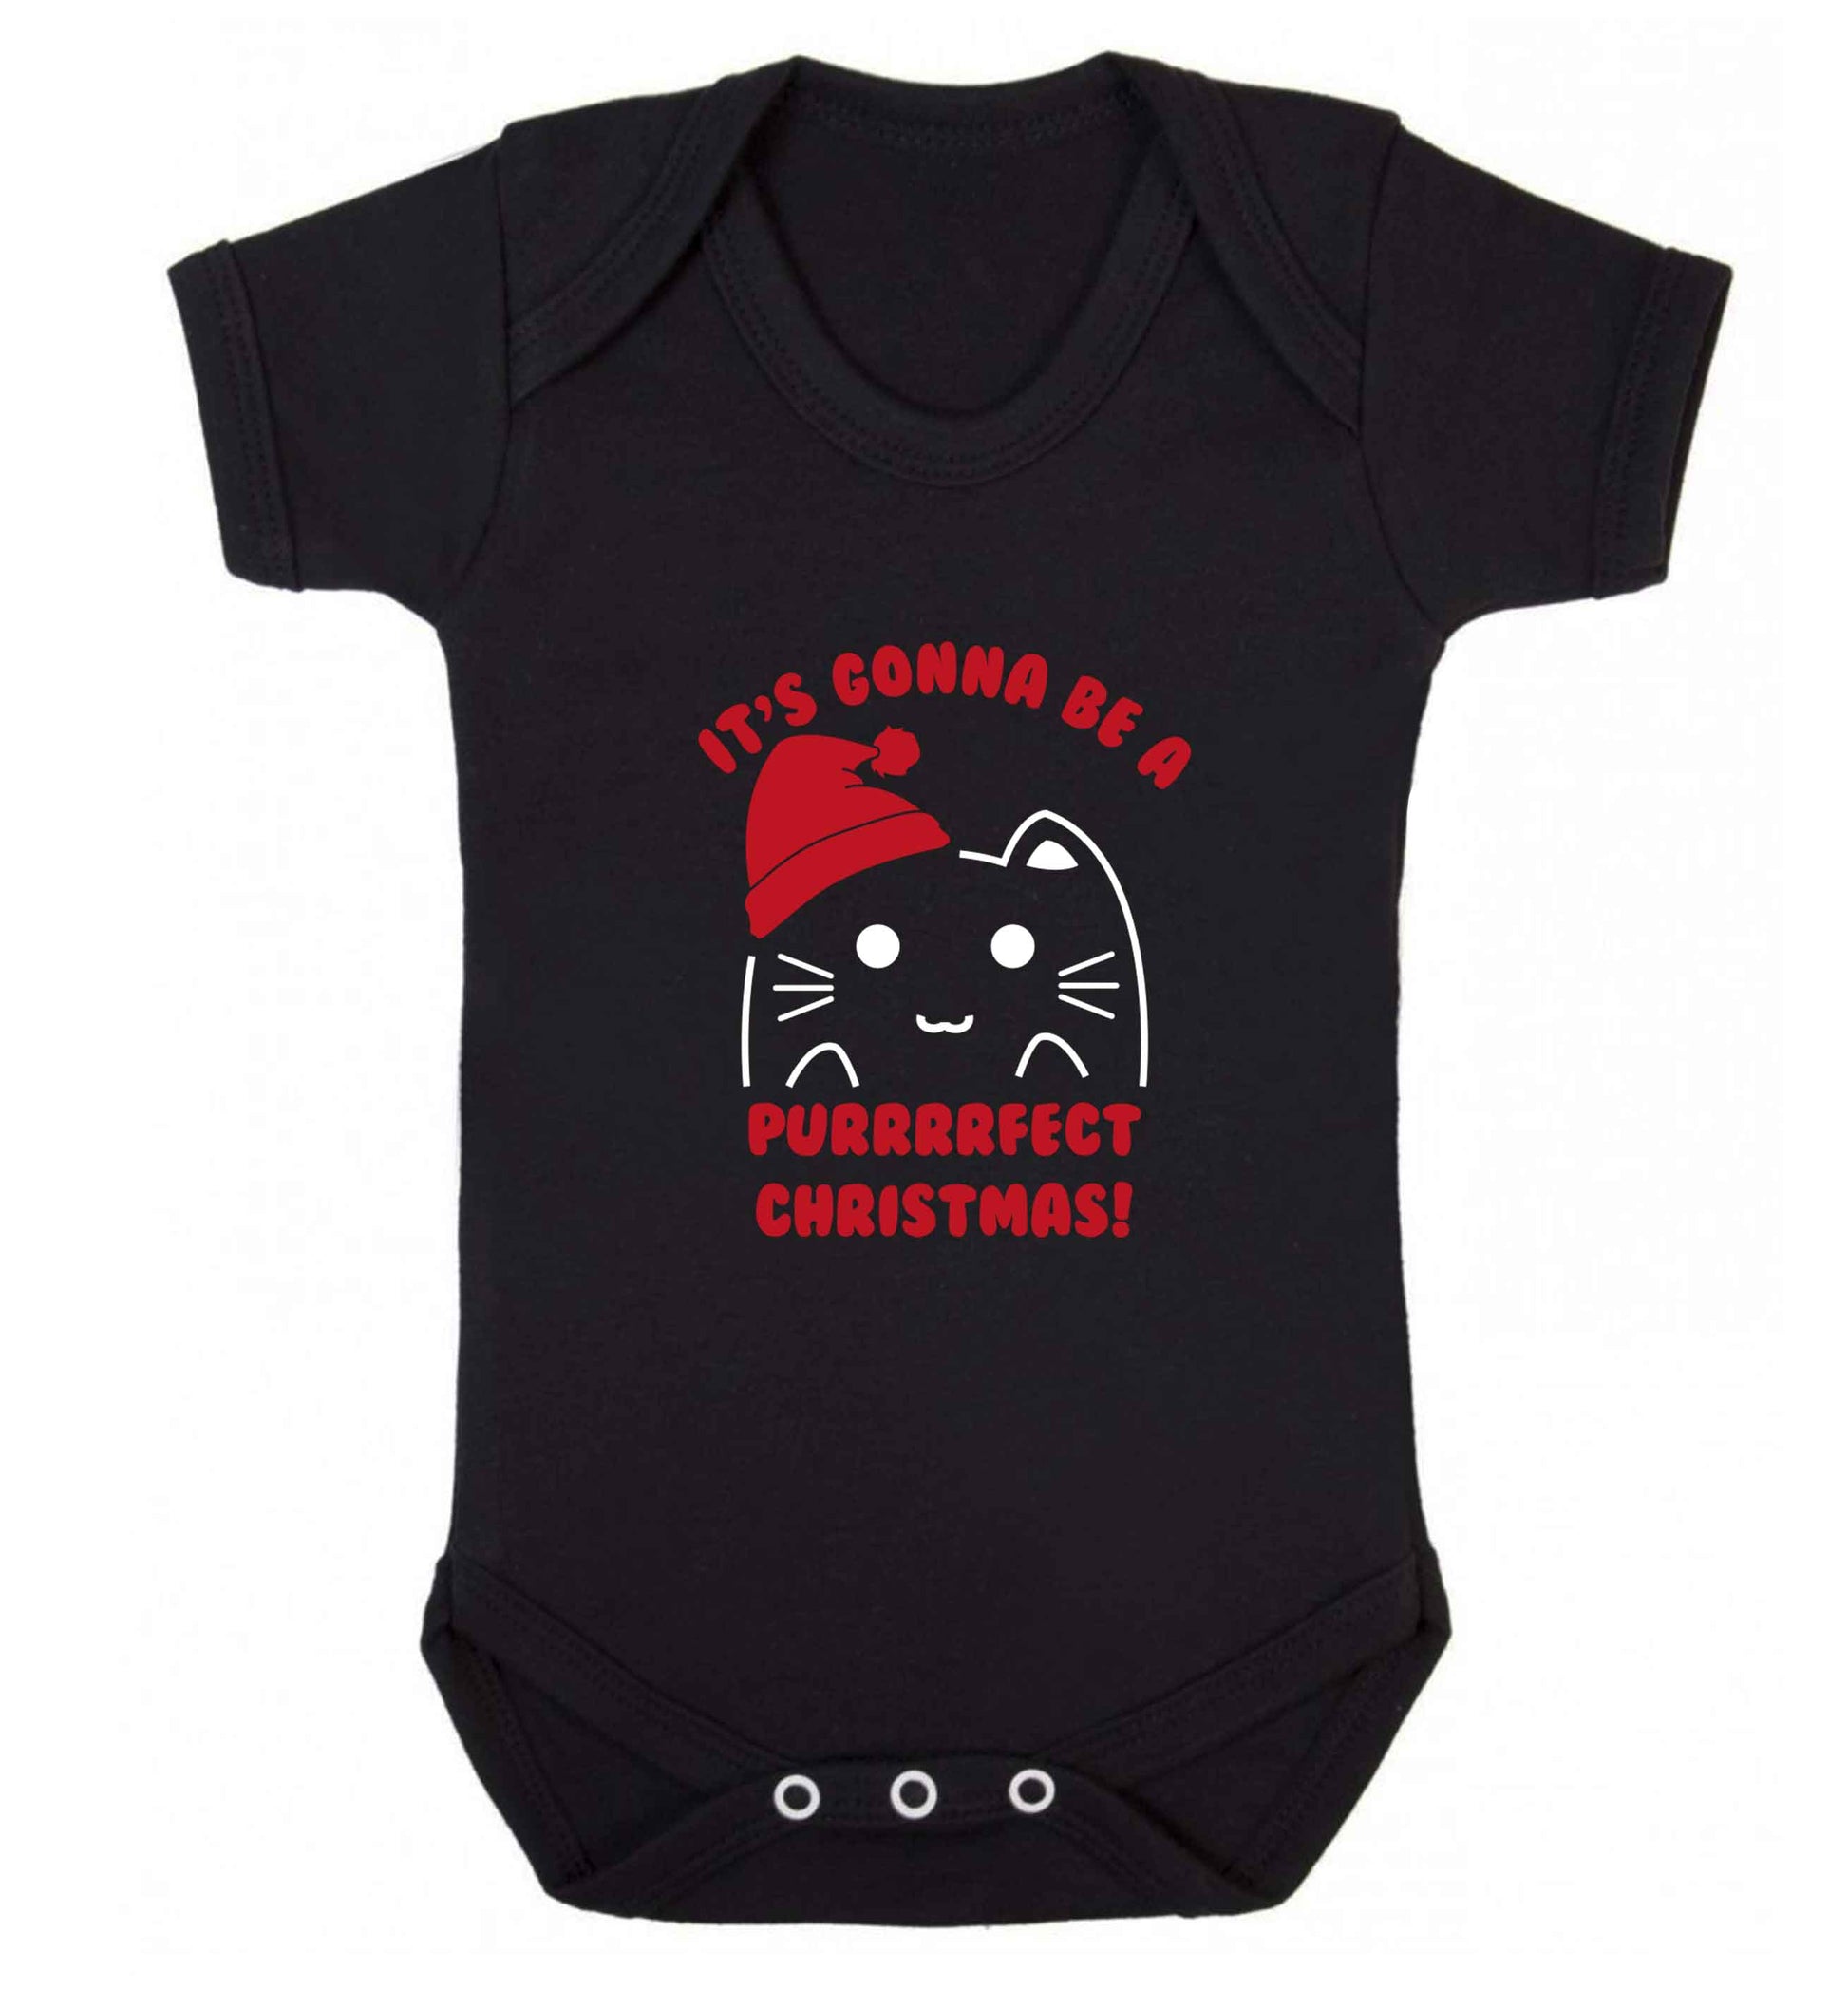 It's going to be a purrfect Christmas baby vest black 18-24 months